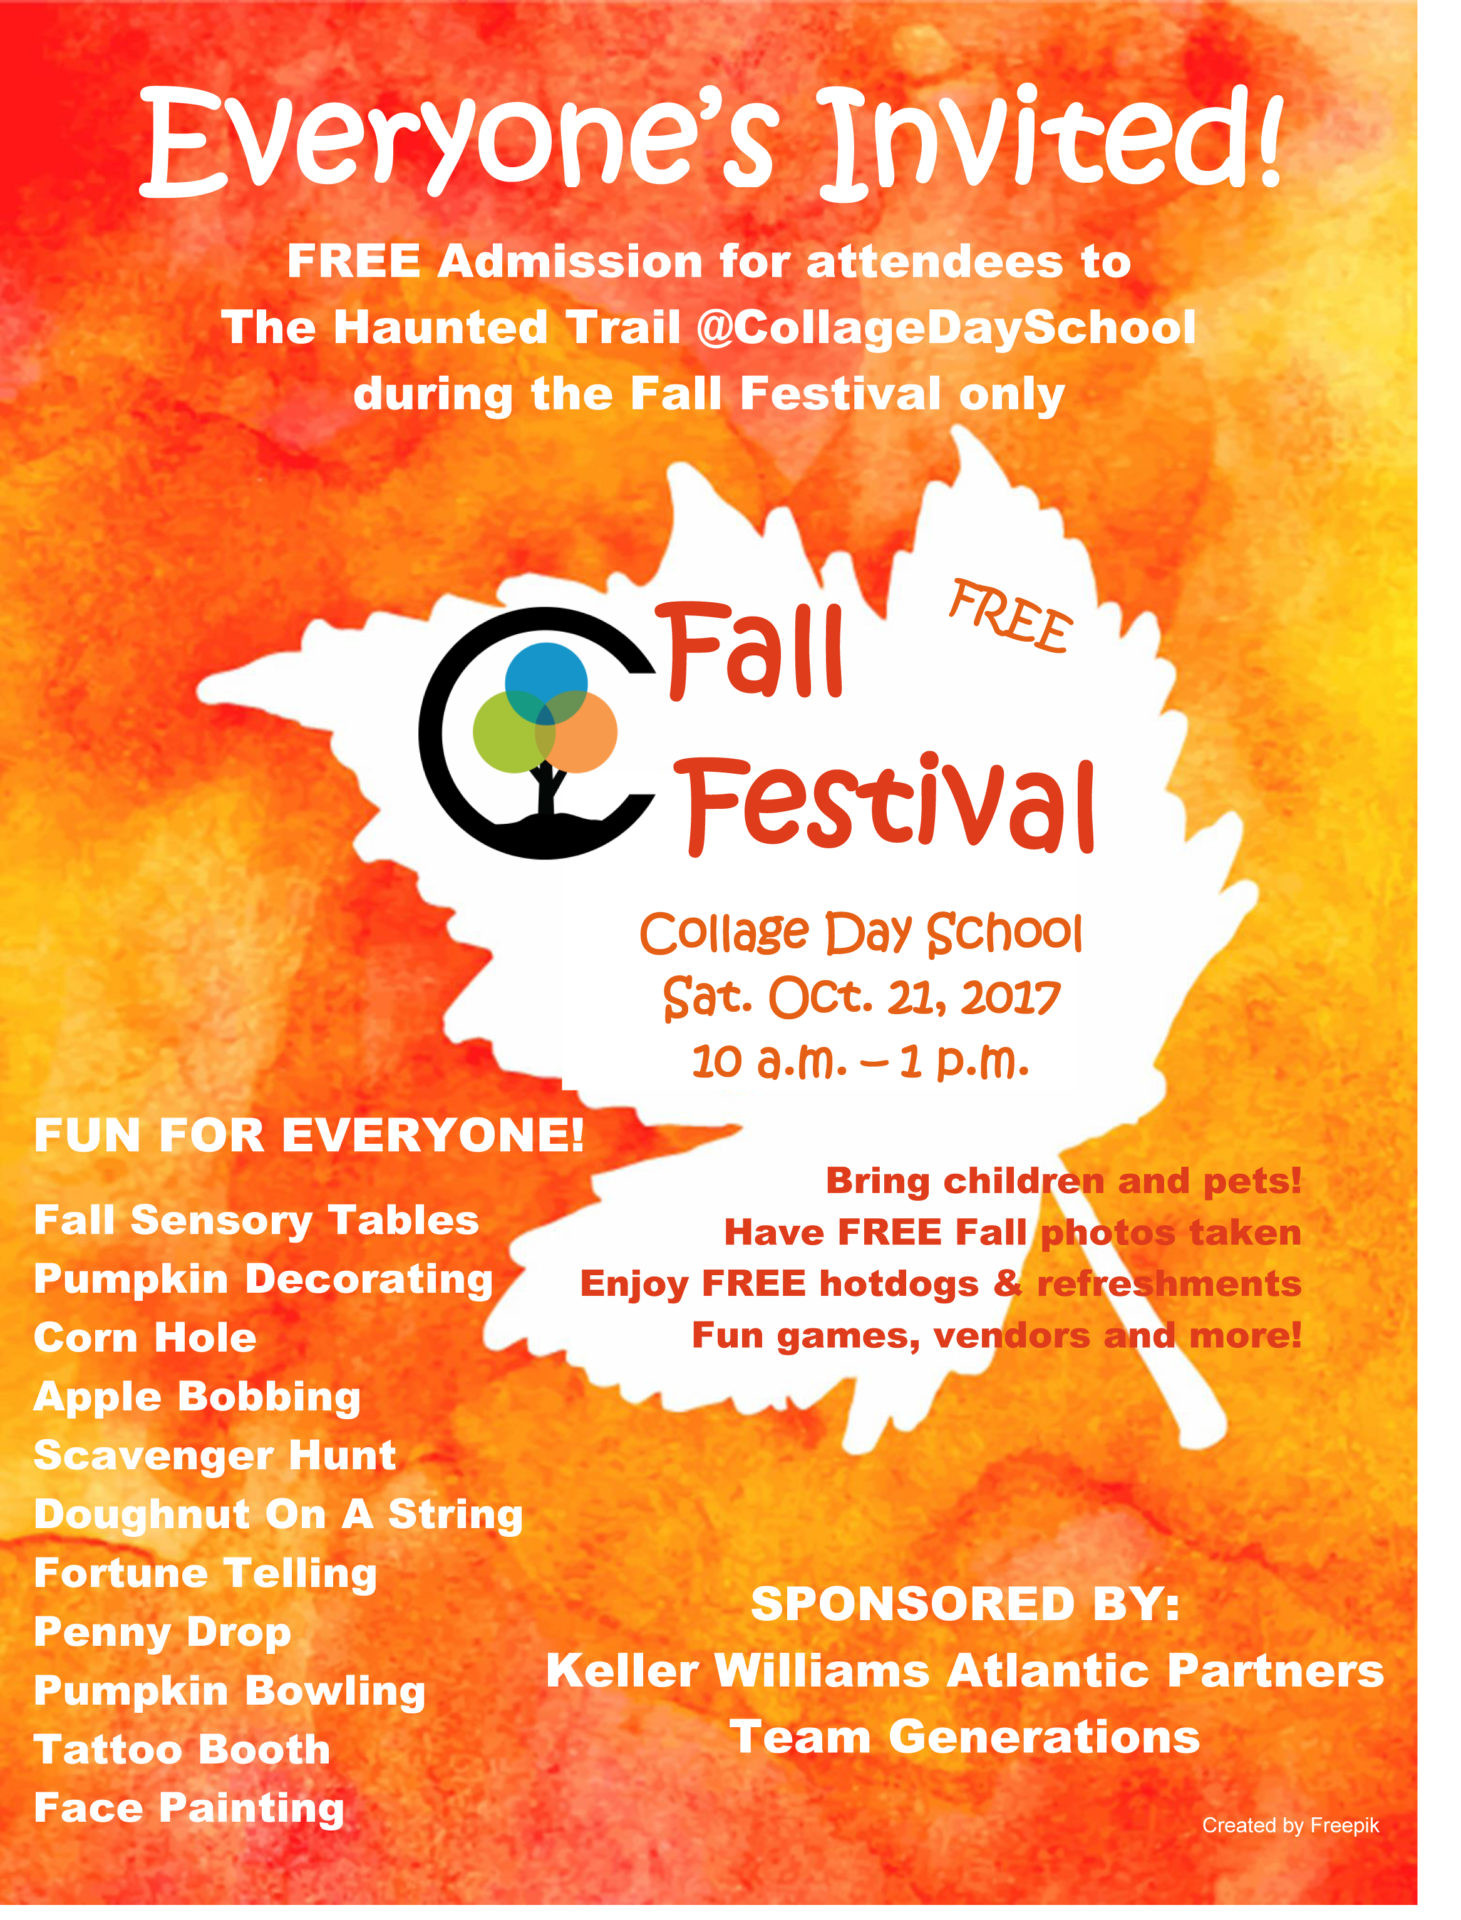 Fall Festival Posters Ideas
 Fall Festival Poster Collage Day School